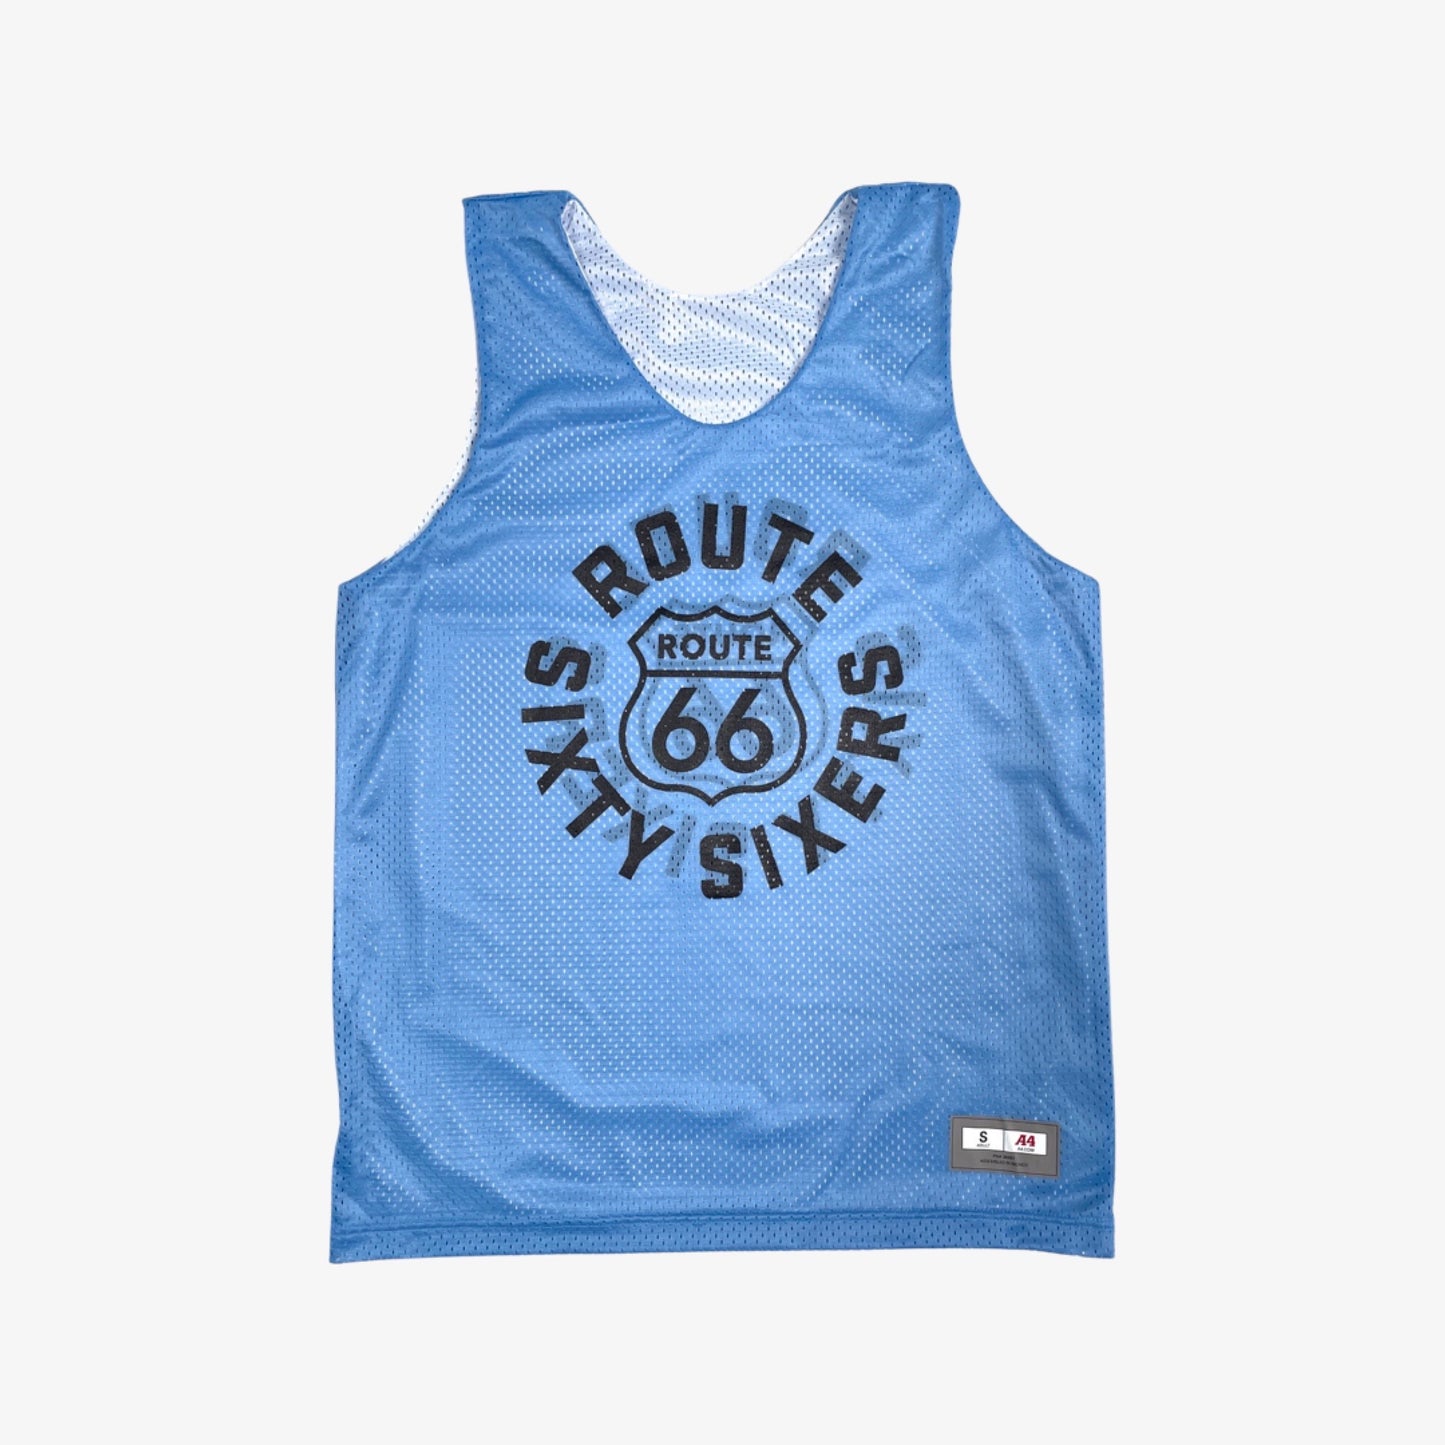 Route 66ers Reversible Practice Jersey